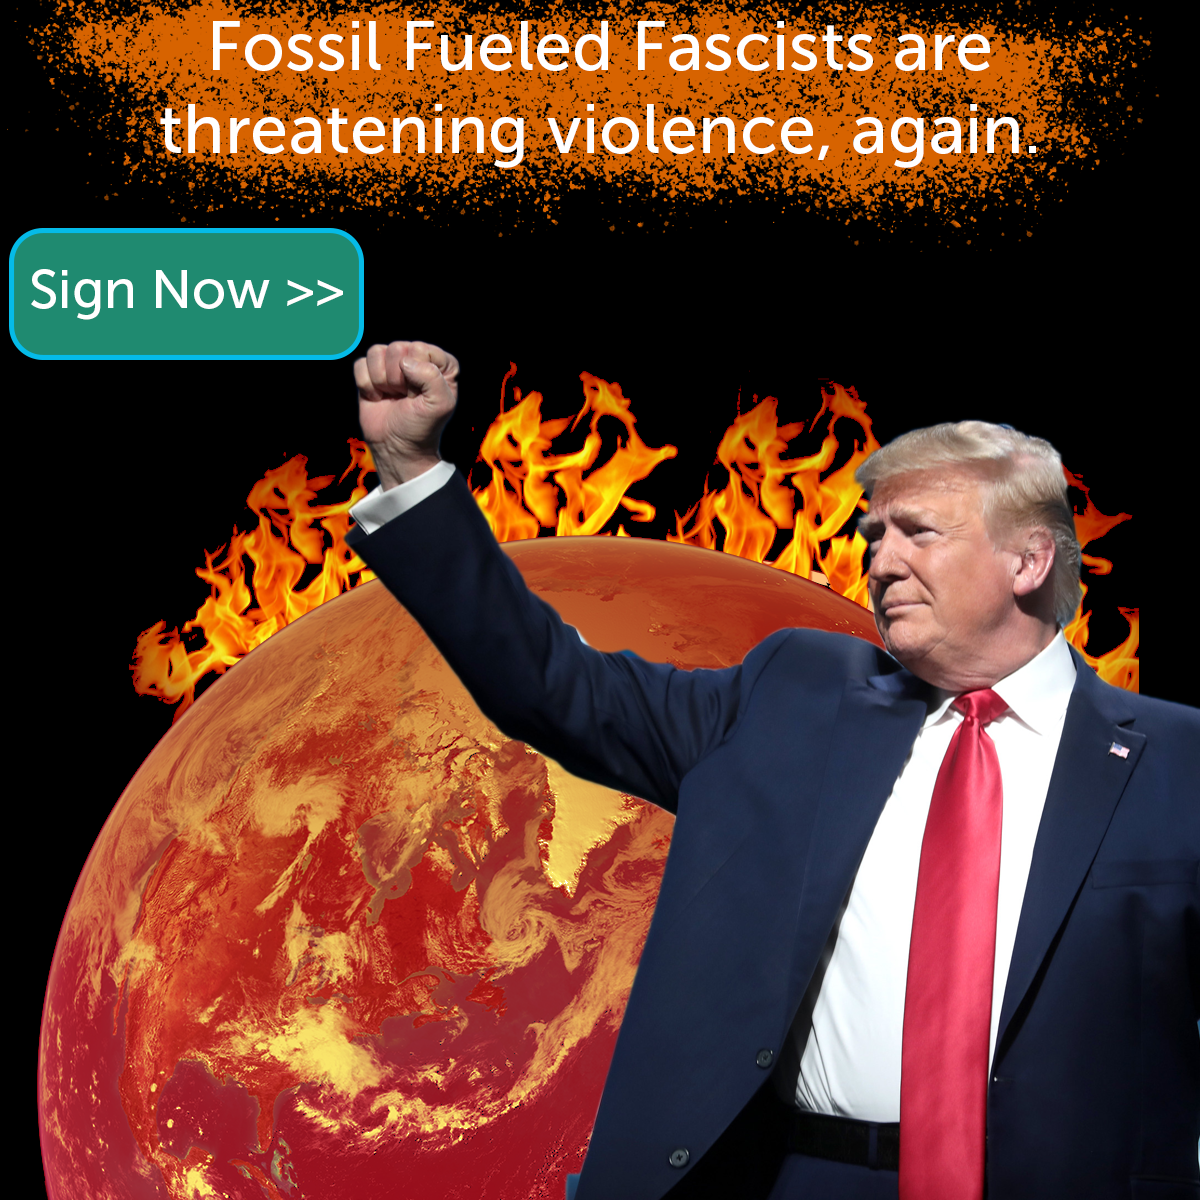 Fossil fueled fascists are threatening violence, again. Sign now to condemn it.